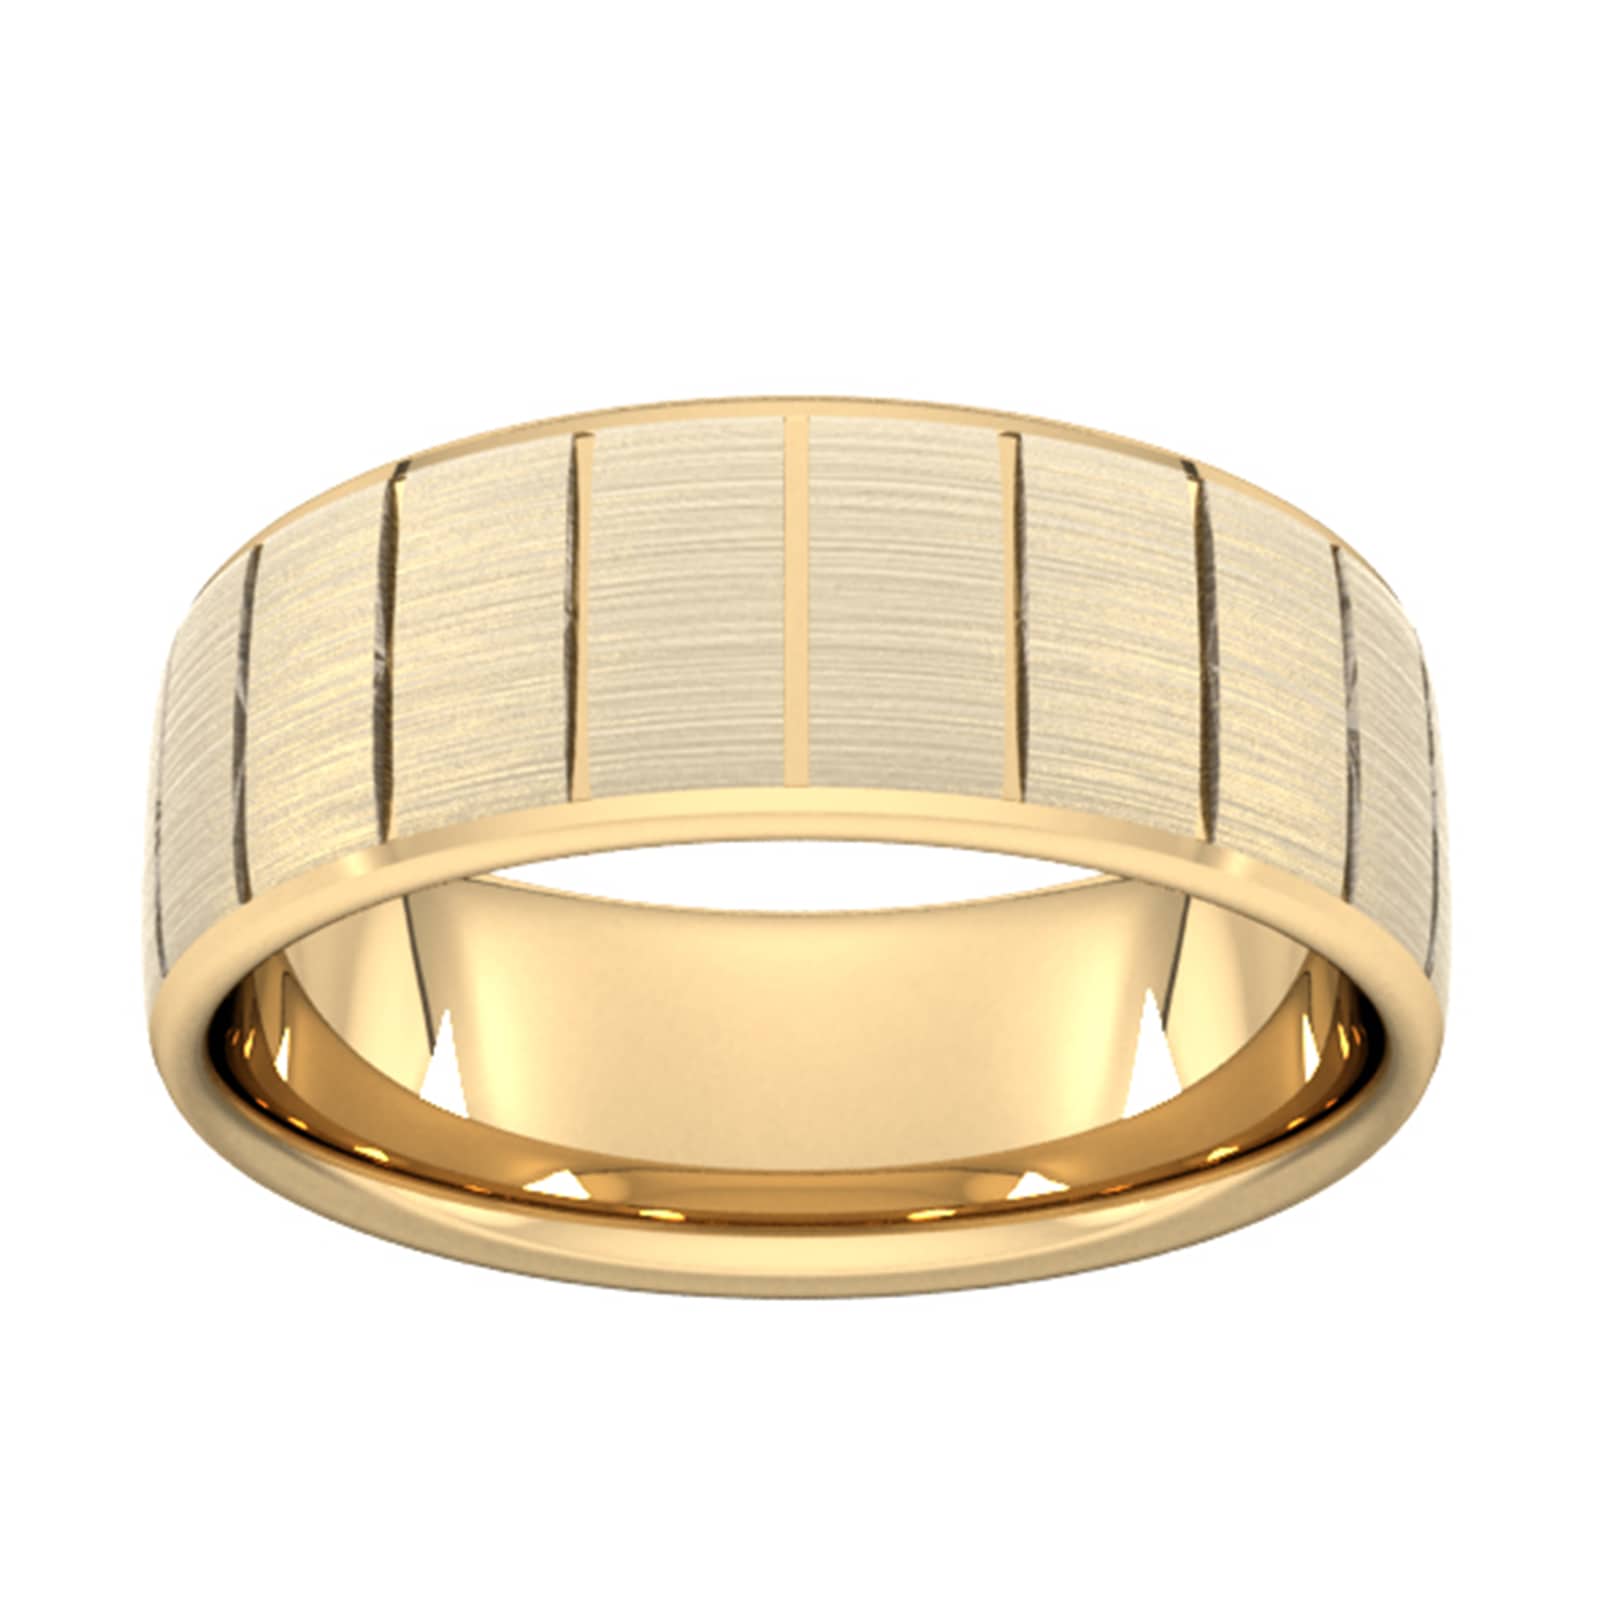 8mm Traditional Court Heavy Vertical Lines Wedding Ring In 18 Carat Yellow Gold - Ring Size S